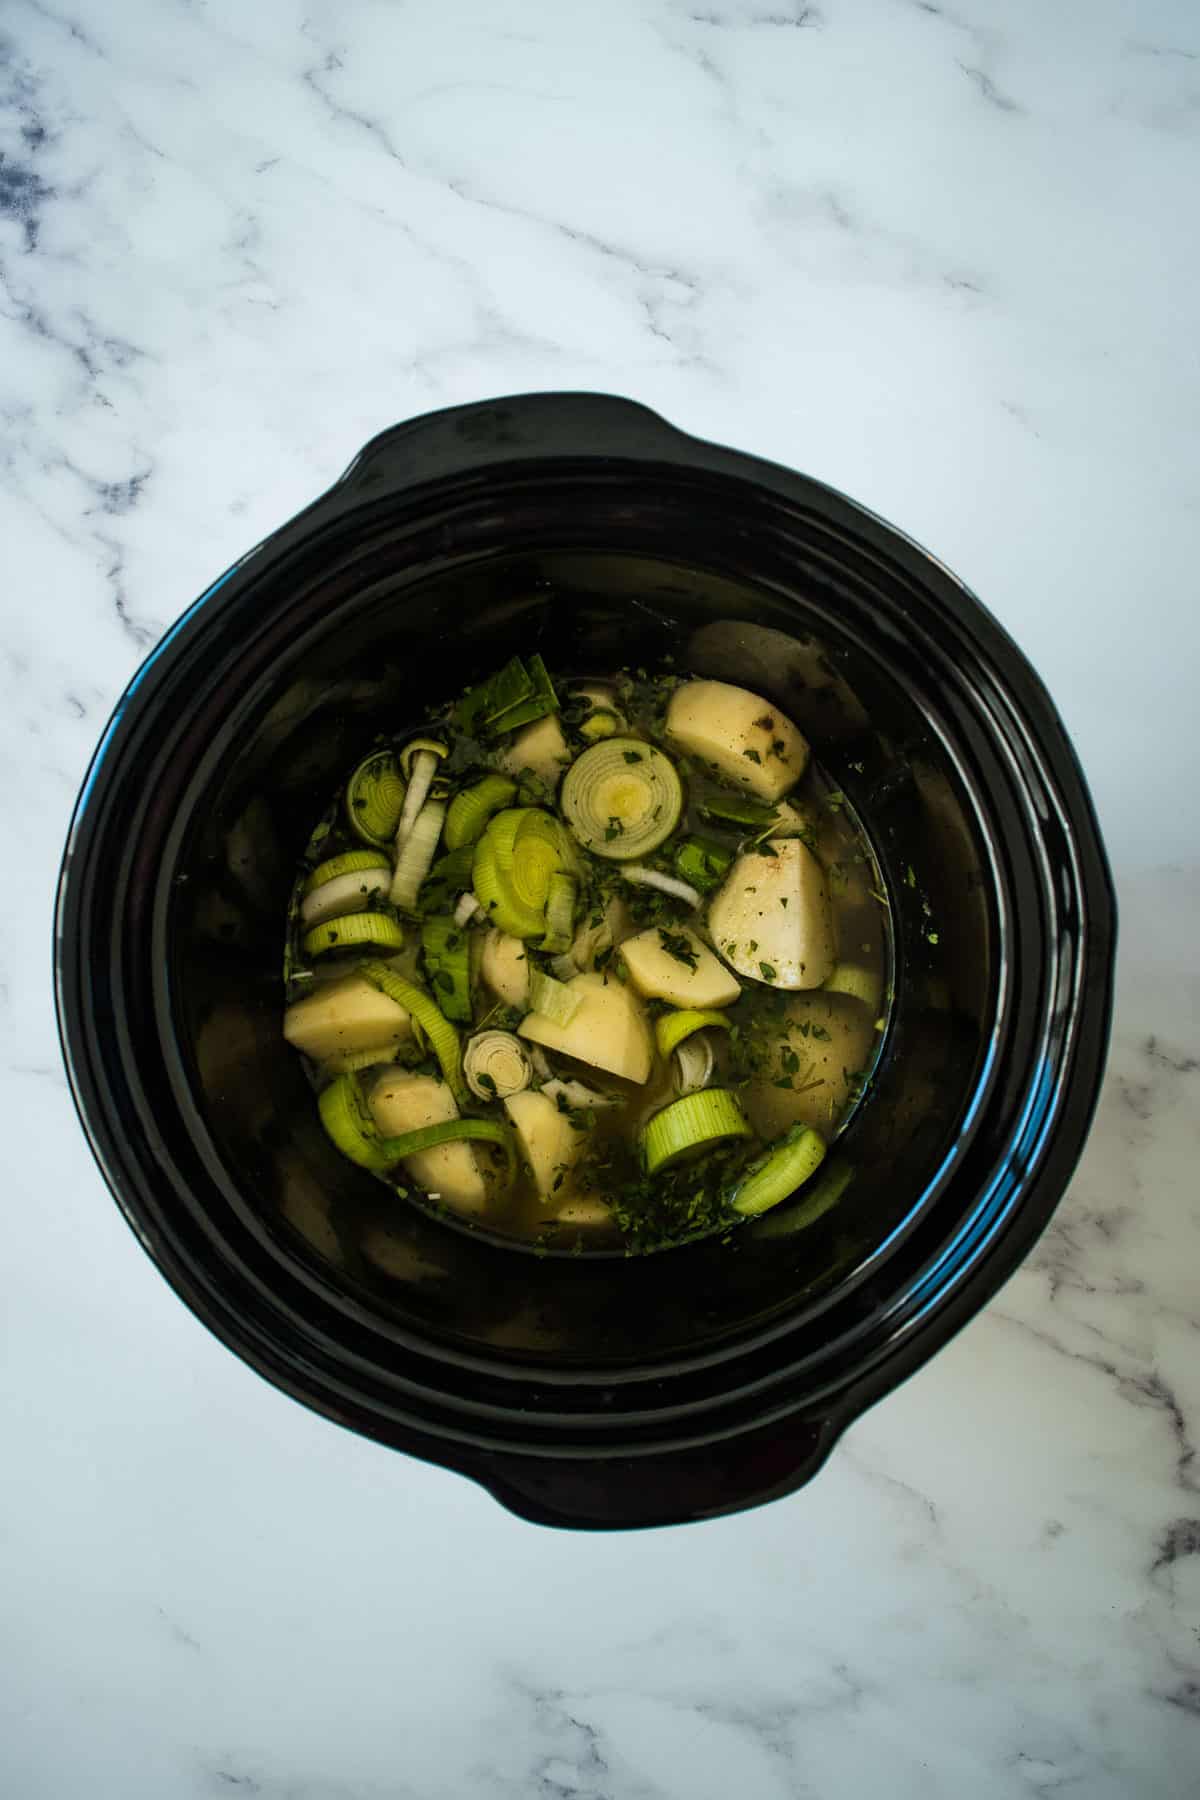 Leeks, potatoes and stock in a slow cooker.